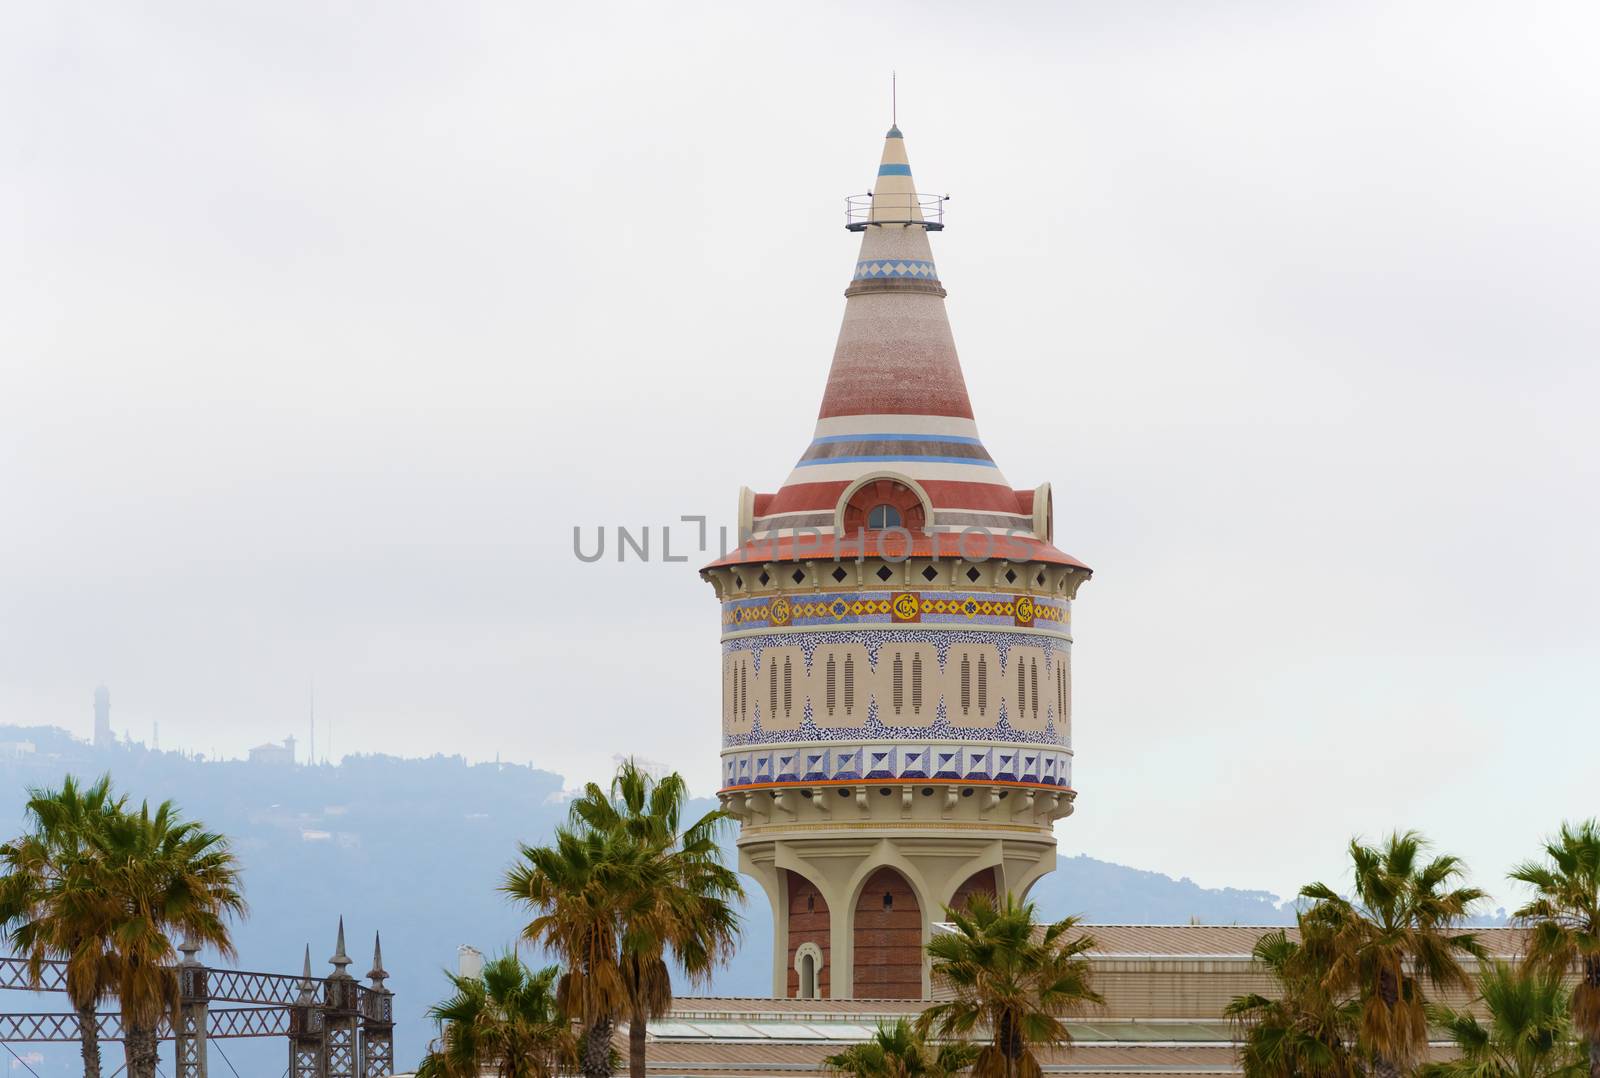 Ornate water tower near hospital by seafront at Barceloneta, Barcelona, Catalonia, Spain 